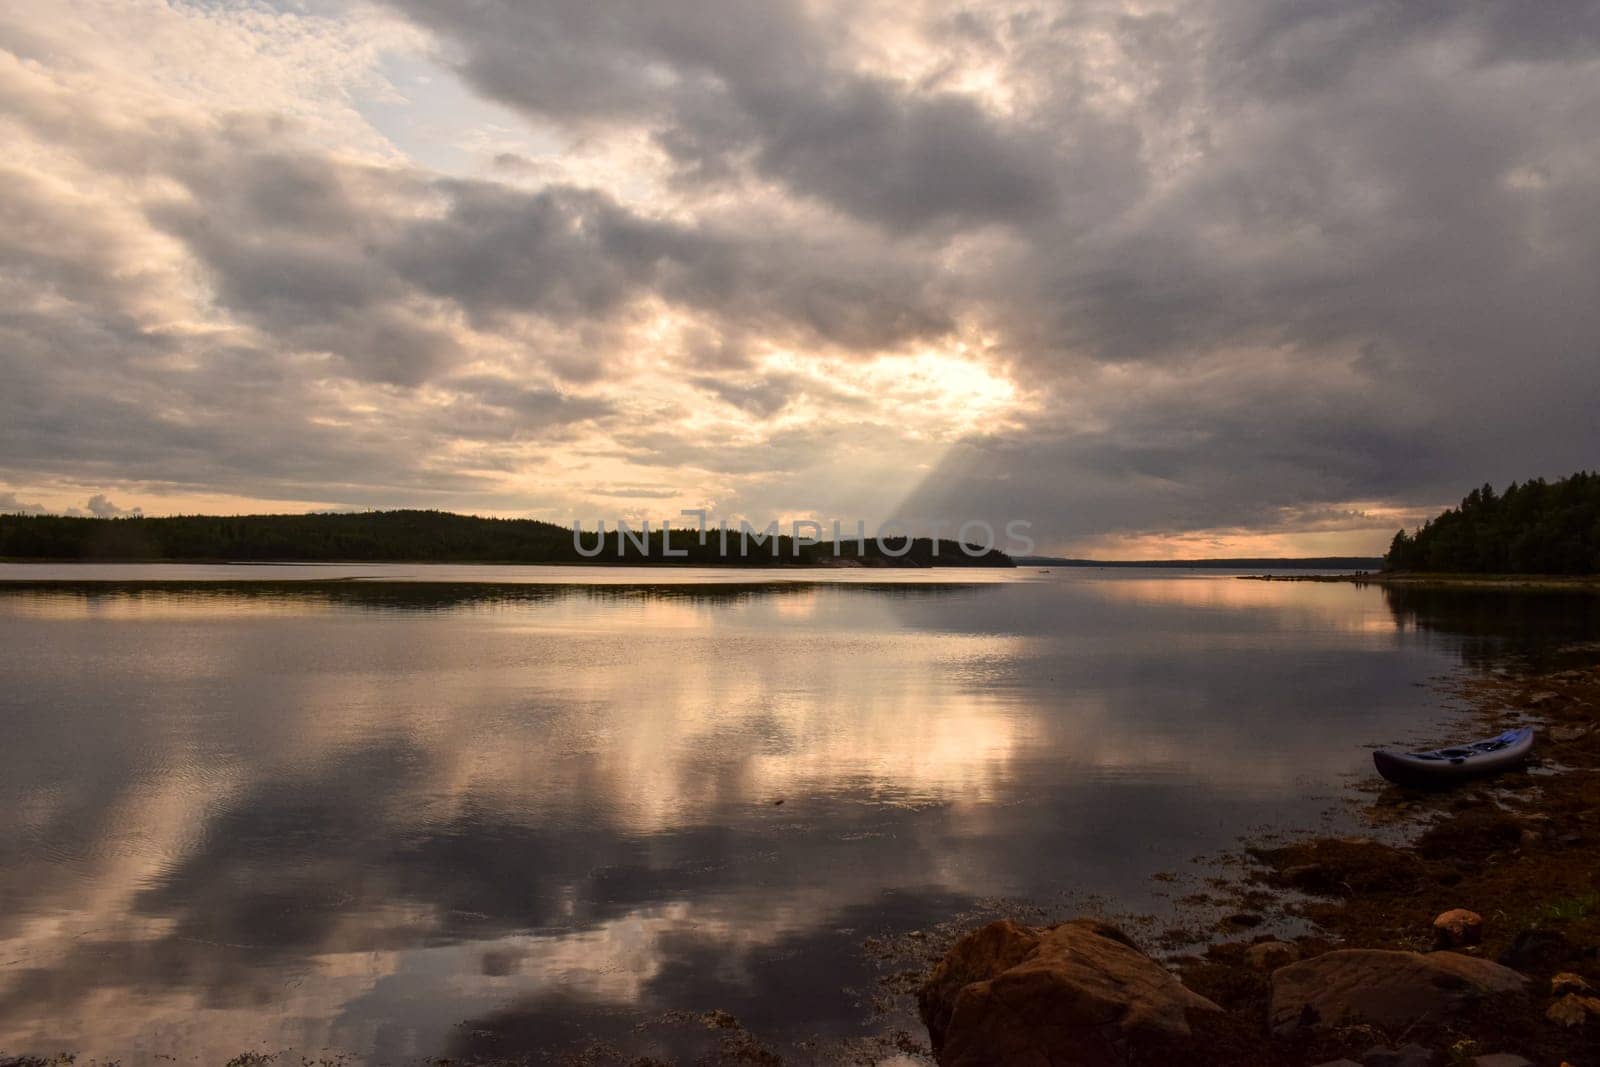 A boat sitting on the shore of a lake under a cloudy sky, flickering light, photo taken with ektachrome, anamorphic lens flare